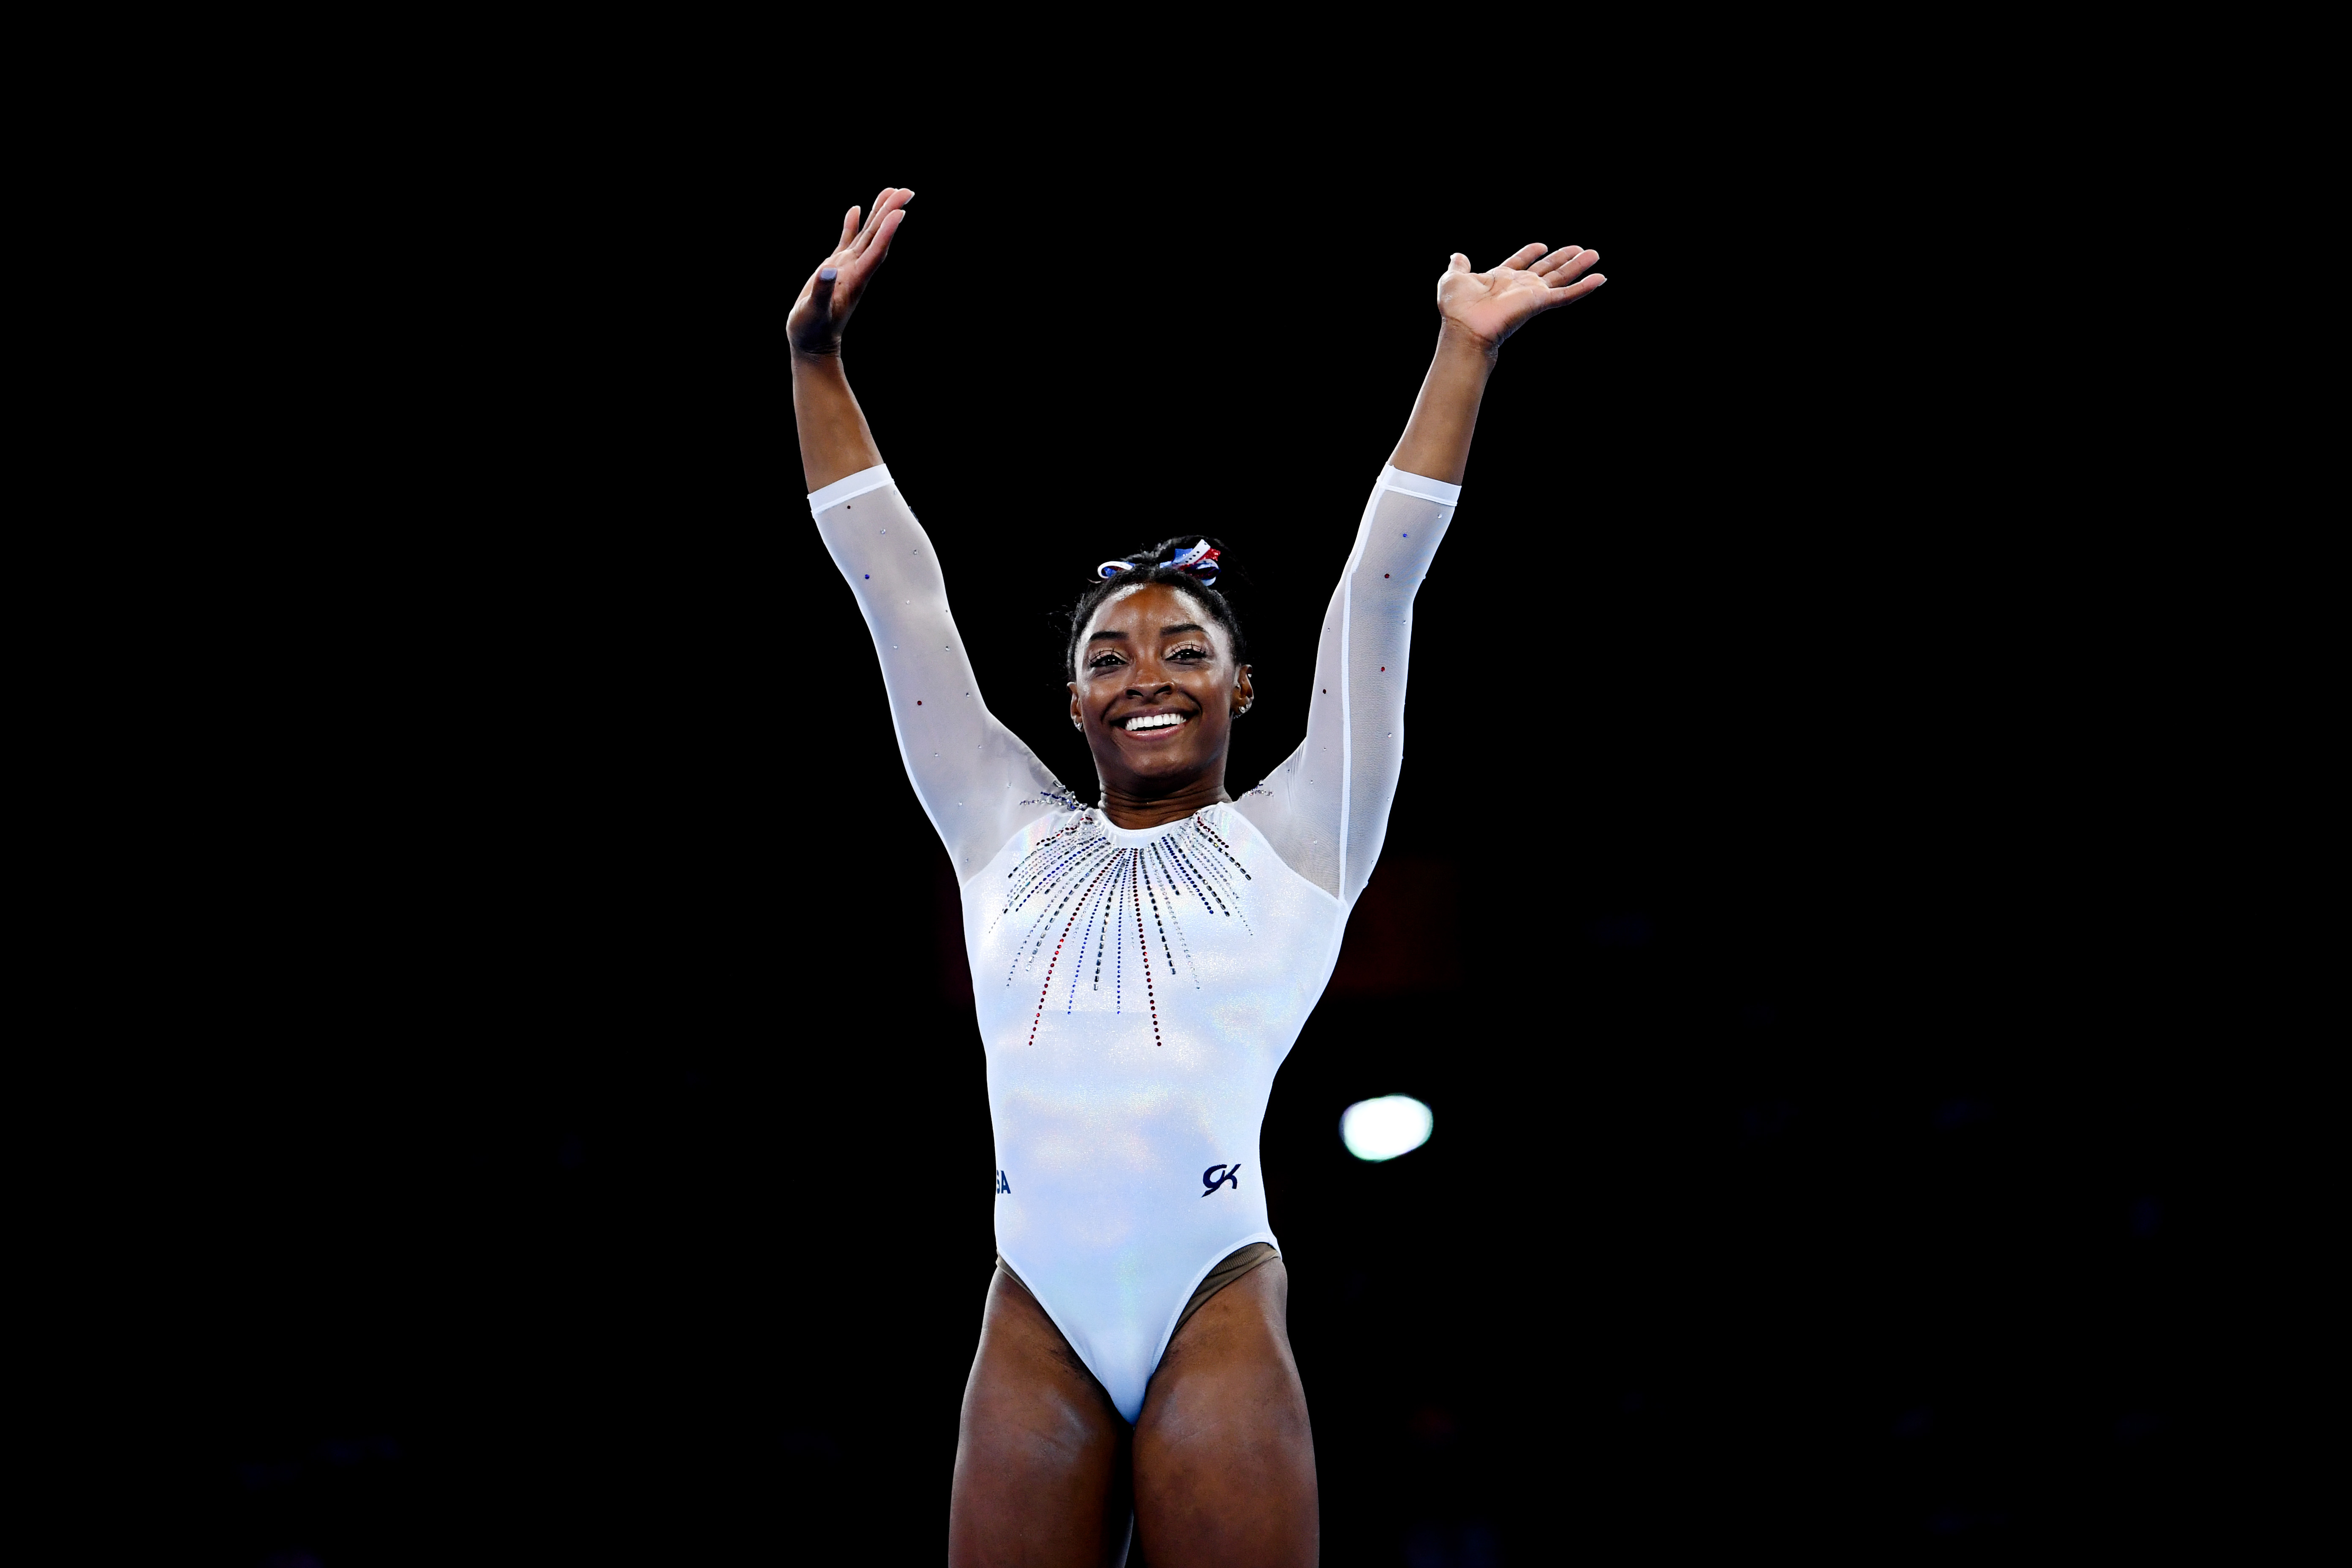 American Simone Biles first female gymnast to win 6 all-around world titles